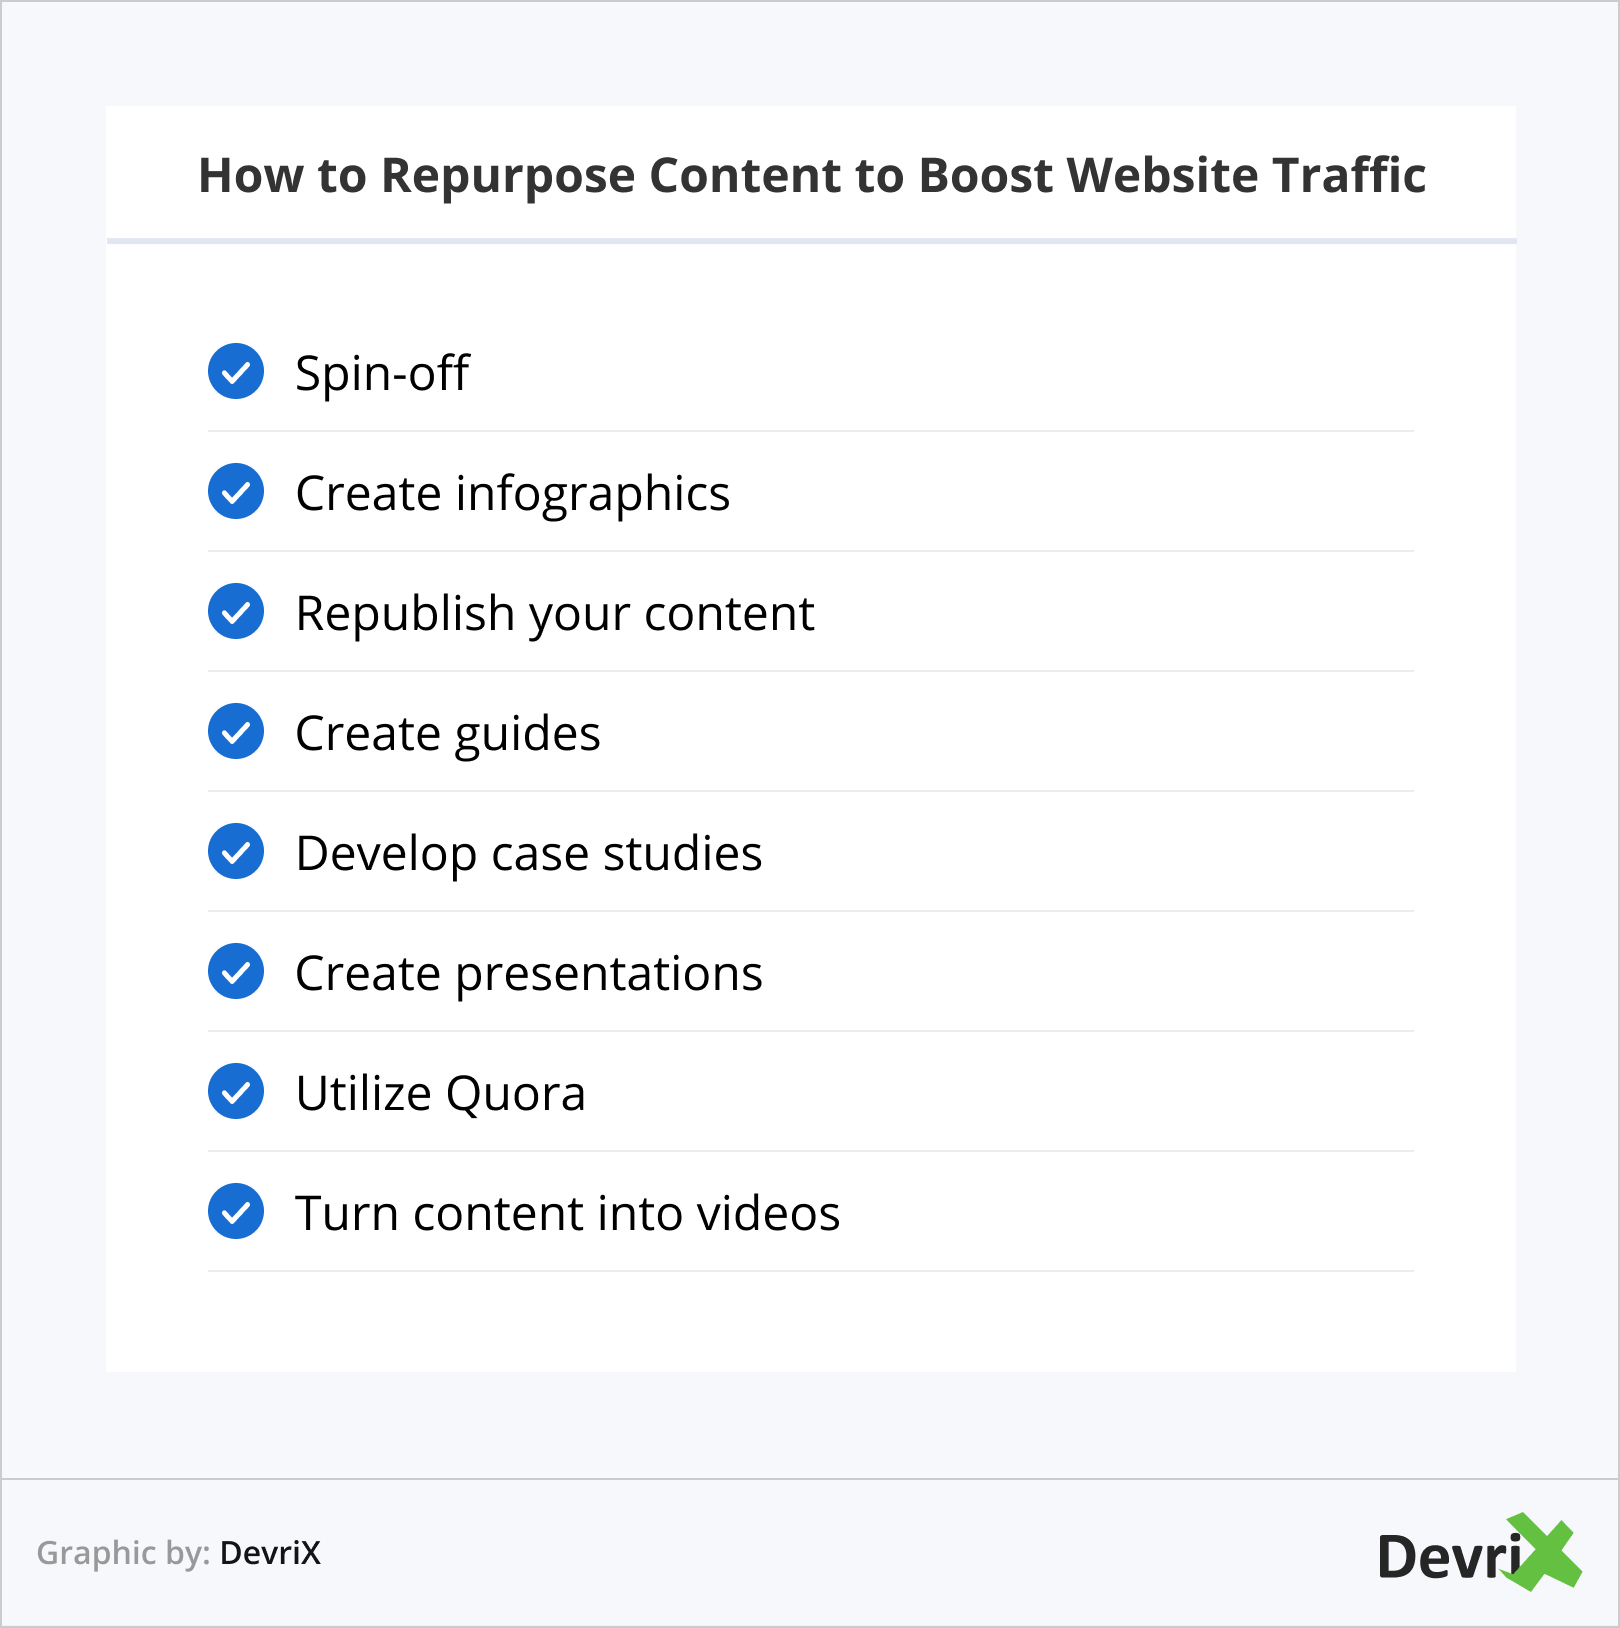 How to Repurpose Content to Boost Website Traffic